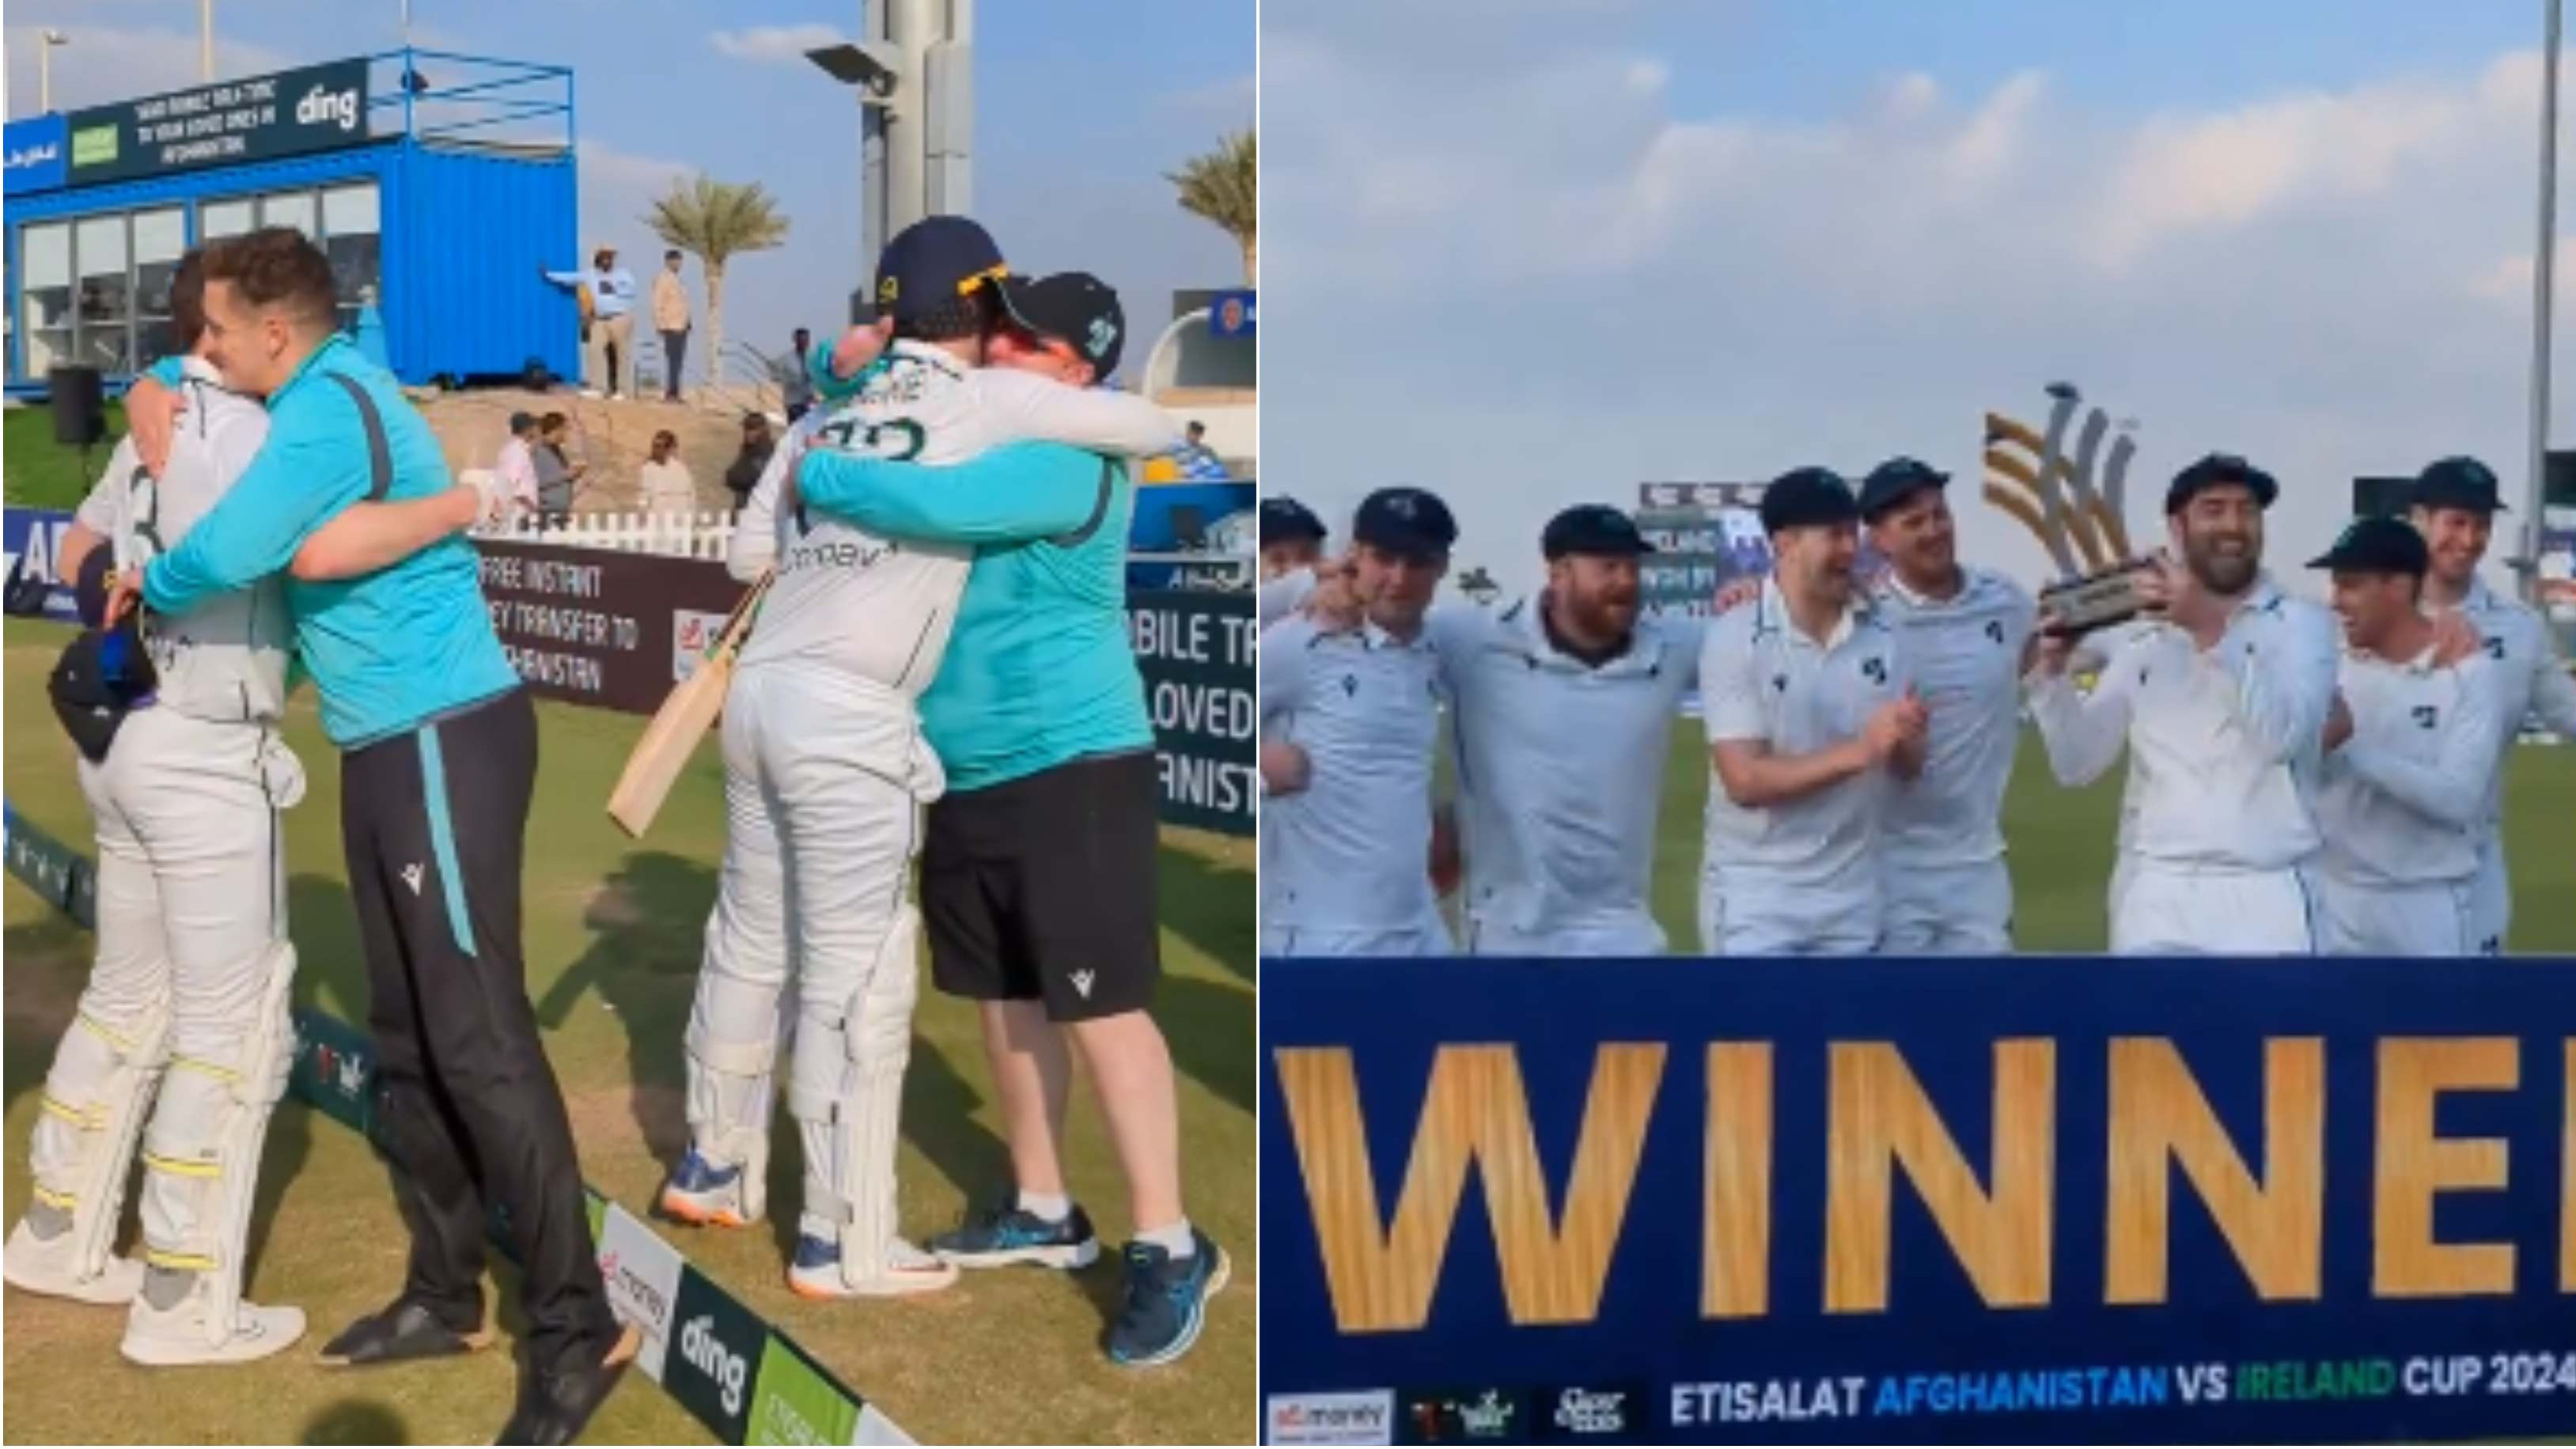 WATCH: Ireland players erupt in joy after securing historic maiden Test win